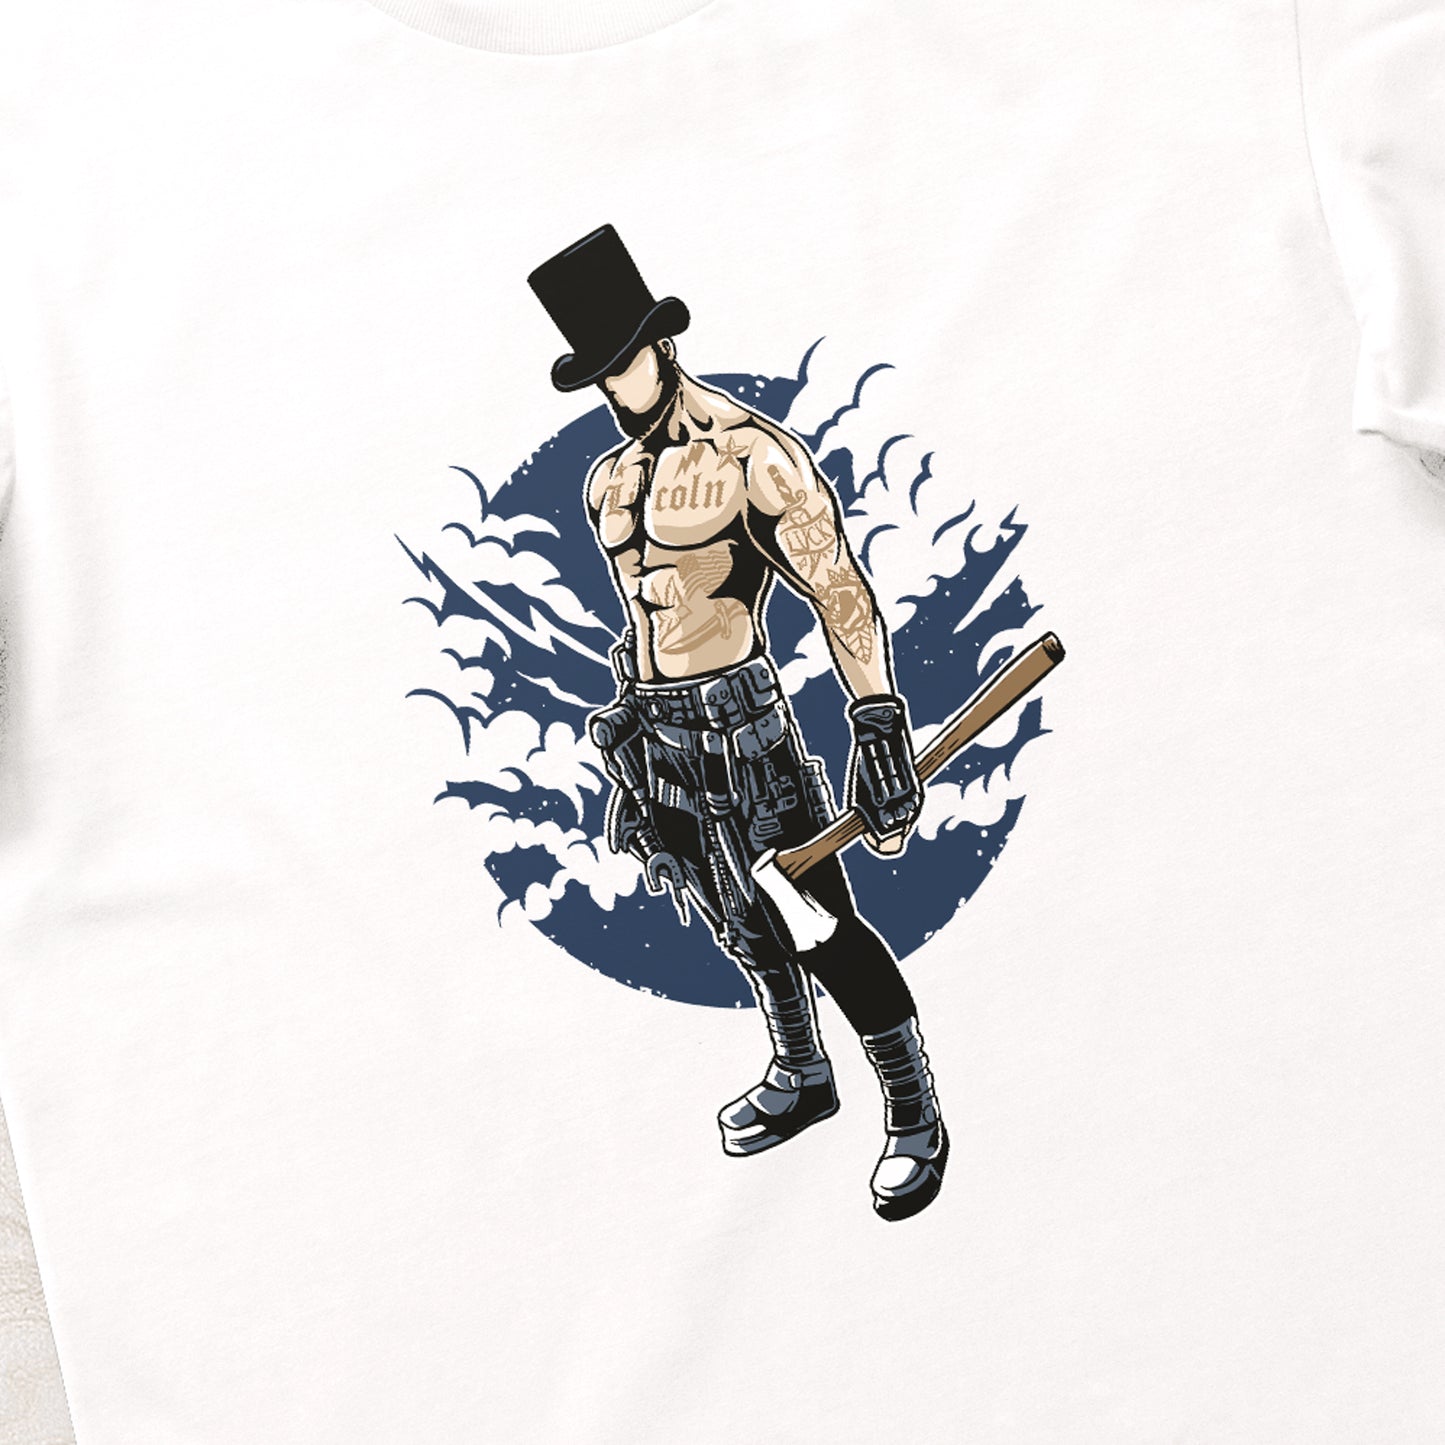 Lucky Lincoln Tshirt Oversize